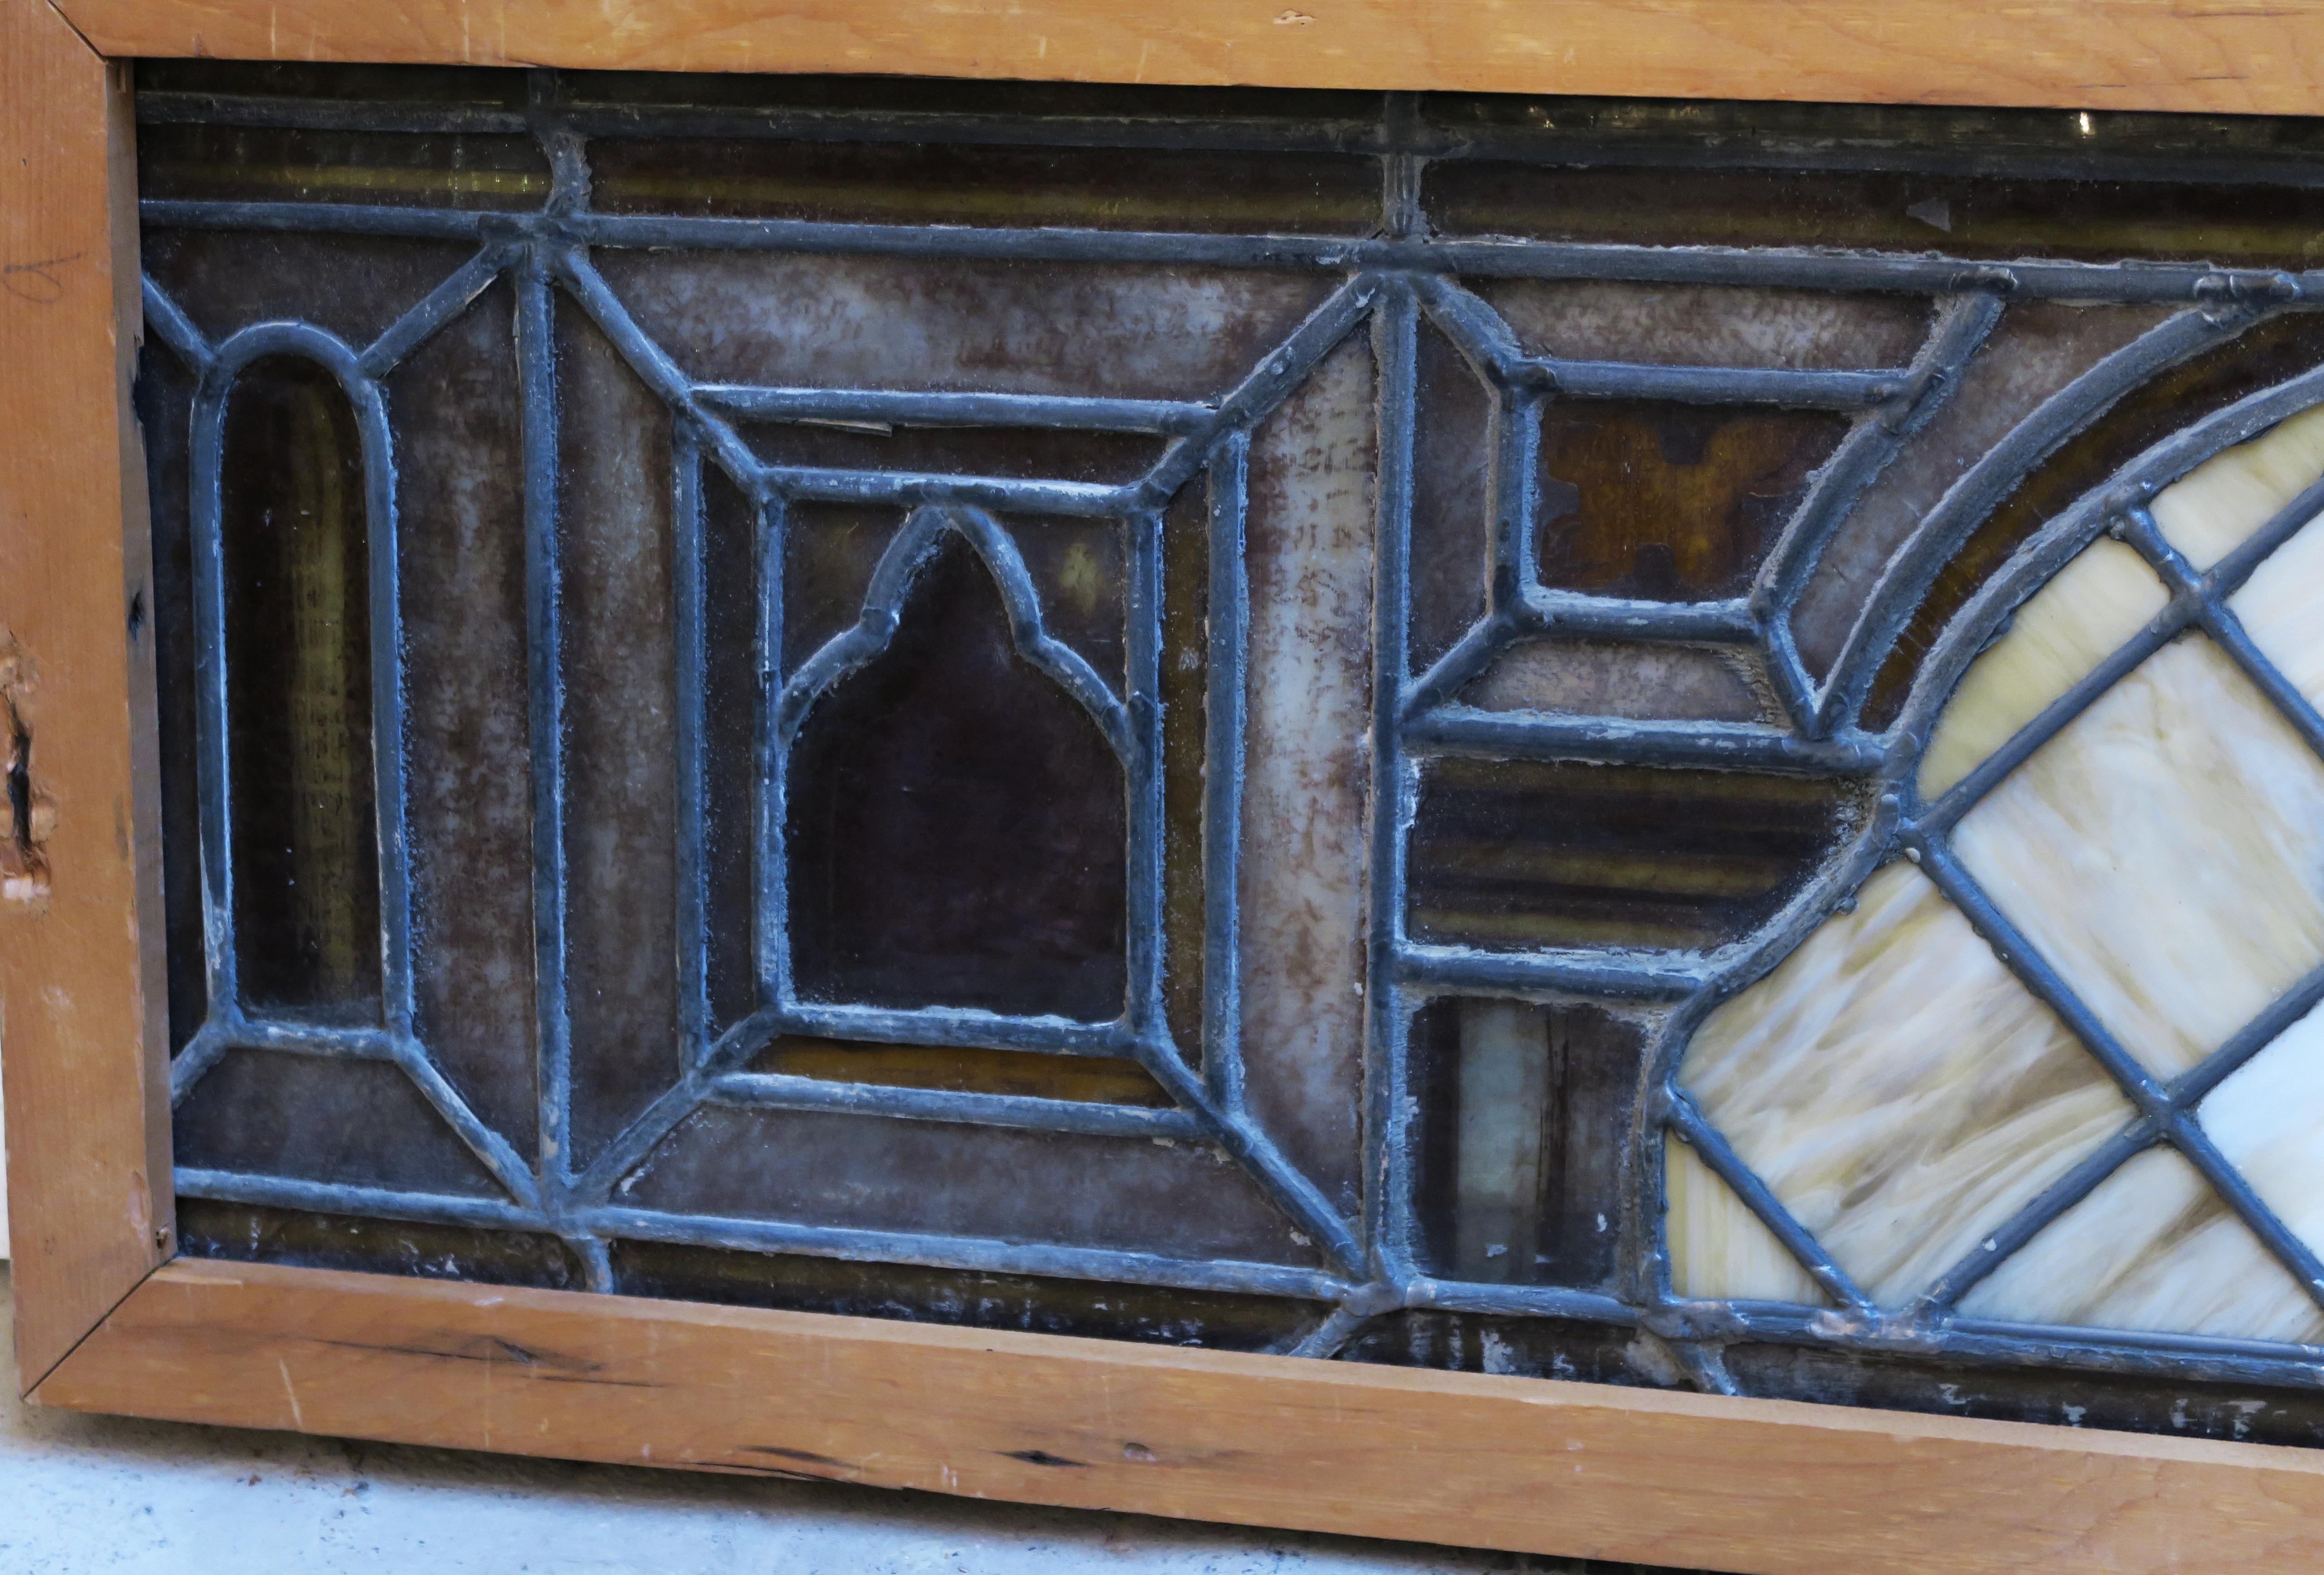 Late 19th Century 1890s Antique Stained Glass Window with a Center Jewel in New Frame